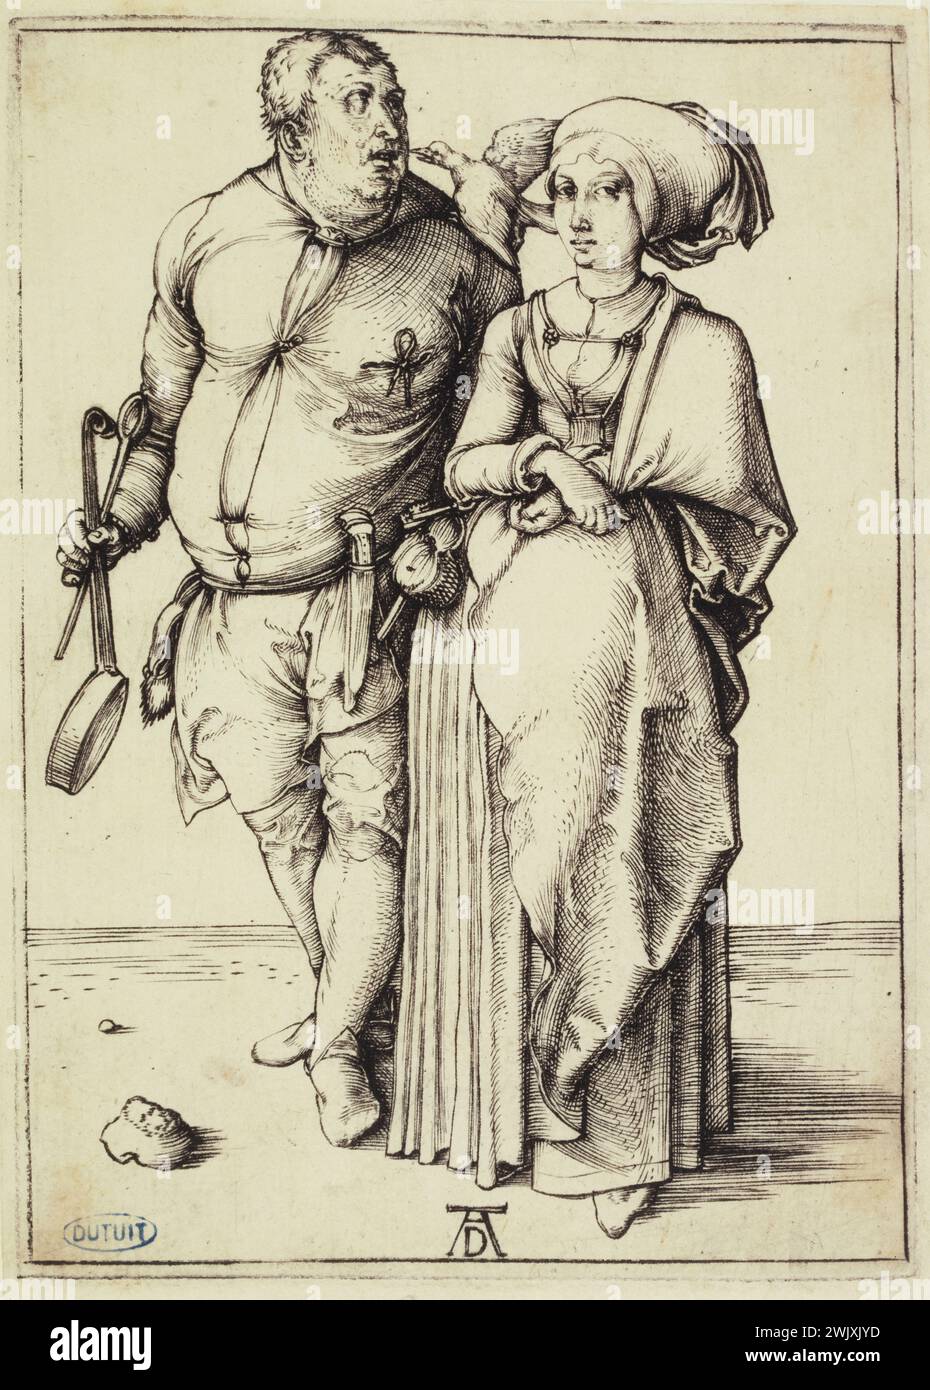 Albrecht Dürer (1471-1528). The cook and his wife (Bartsch 84). 1496-1497. Museum of Fine Arts of the City of Paris, Petit Palais. 77215-2 Cook, woman, renaissance, 15th 15th 15th 15th 15th 15 century, couple, engraving Stock Photo